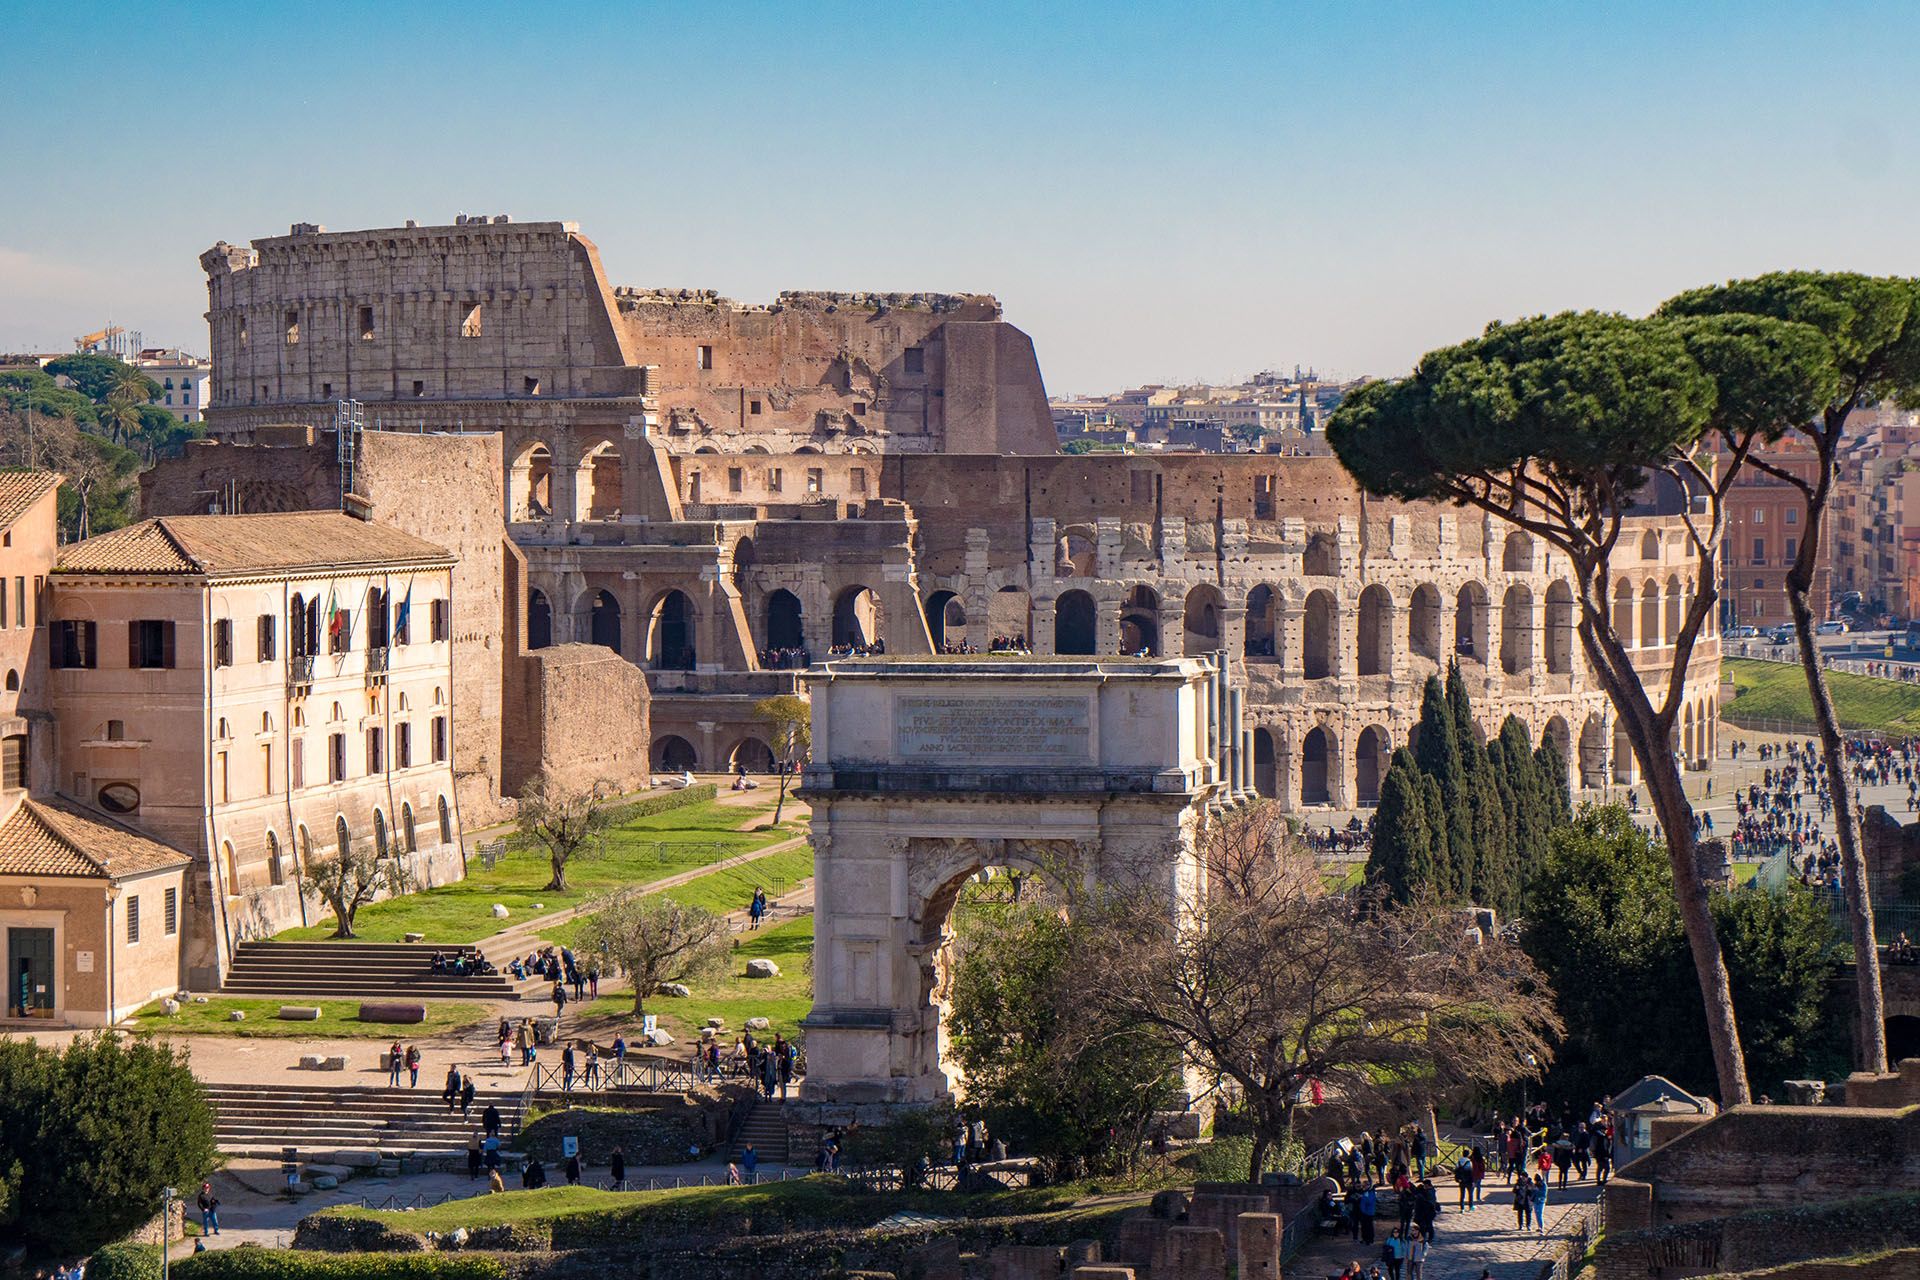 Titus Arch and the Roman Colosseum in Rome, Italy as seen from the Palatine Hill © Shutterstock